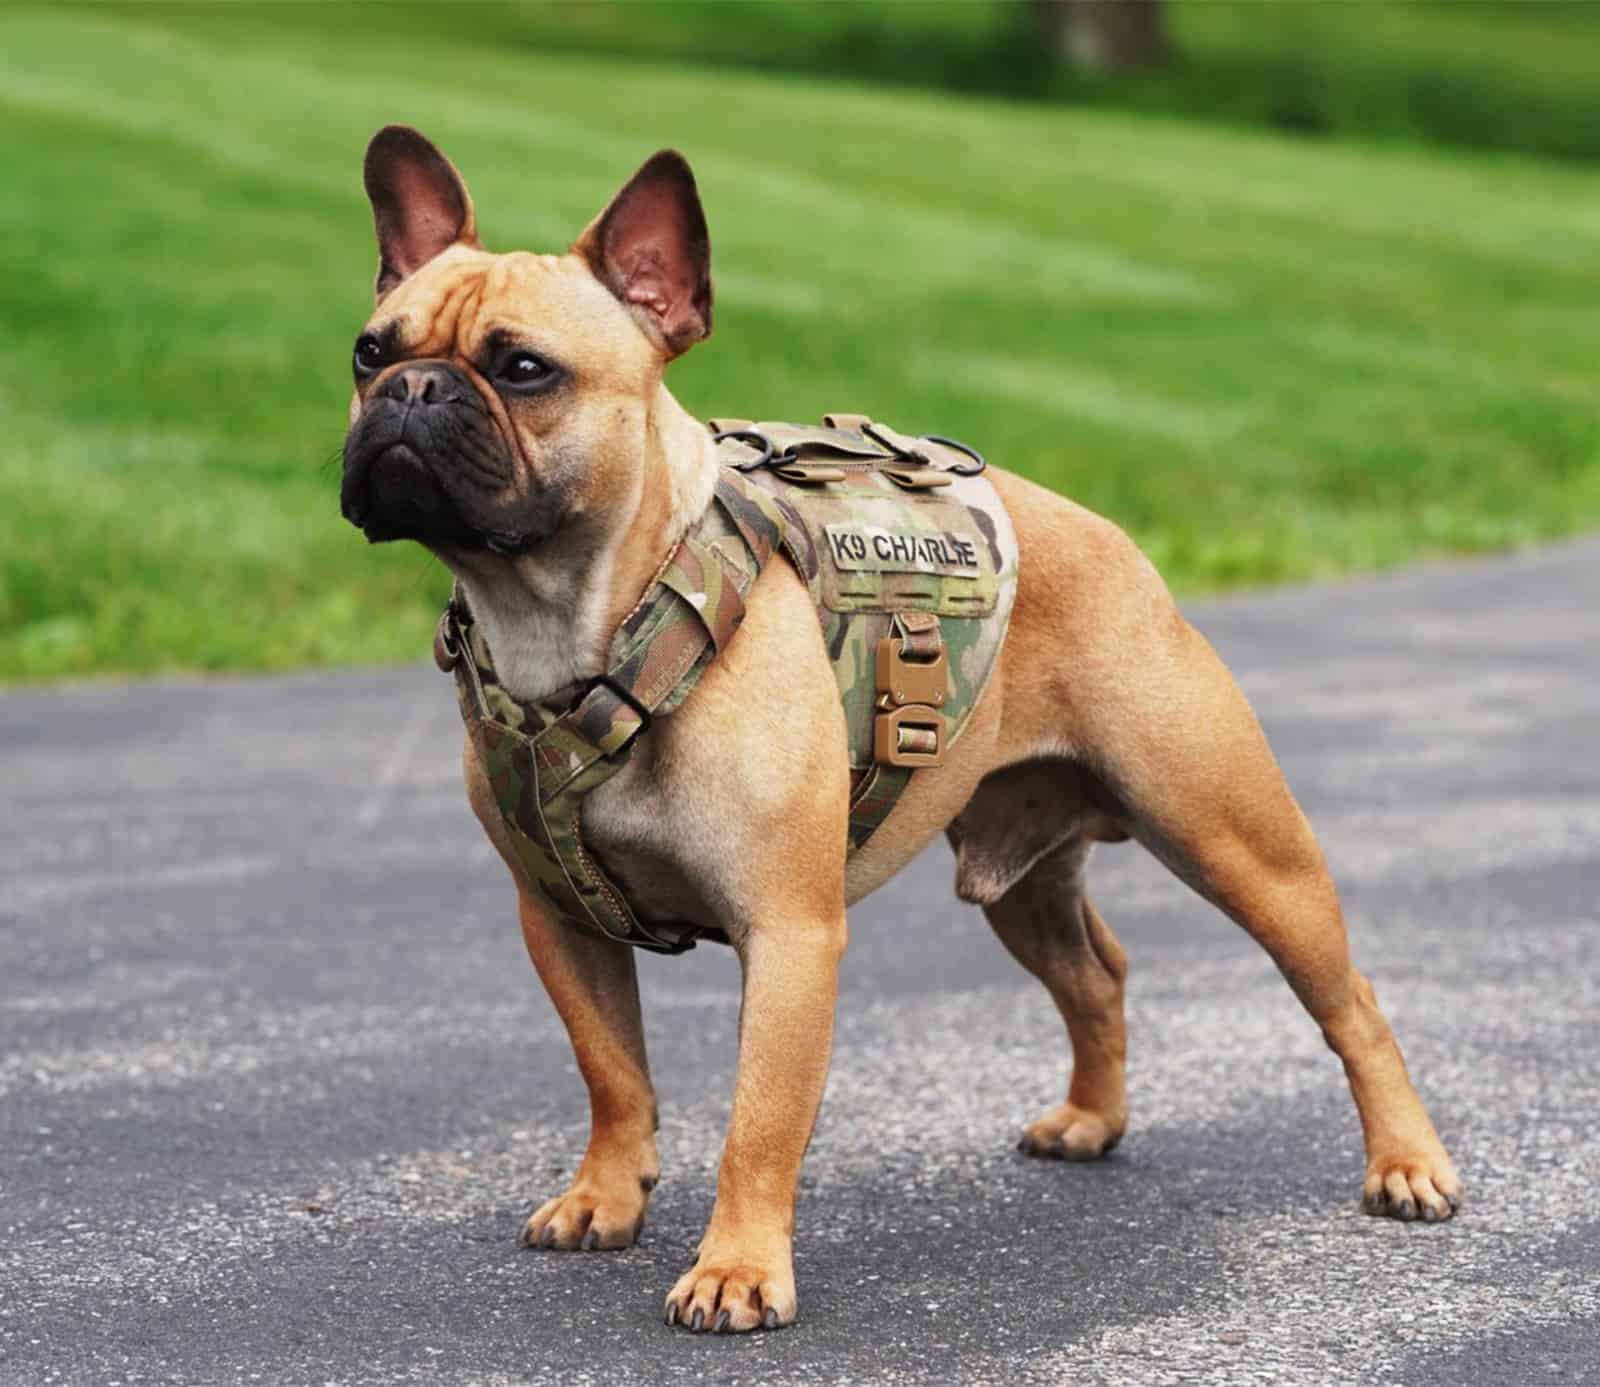 Armoured K9 MINI Vest - Lightweight and Mobile